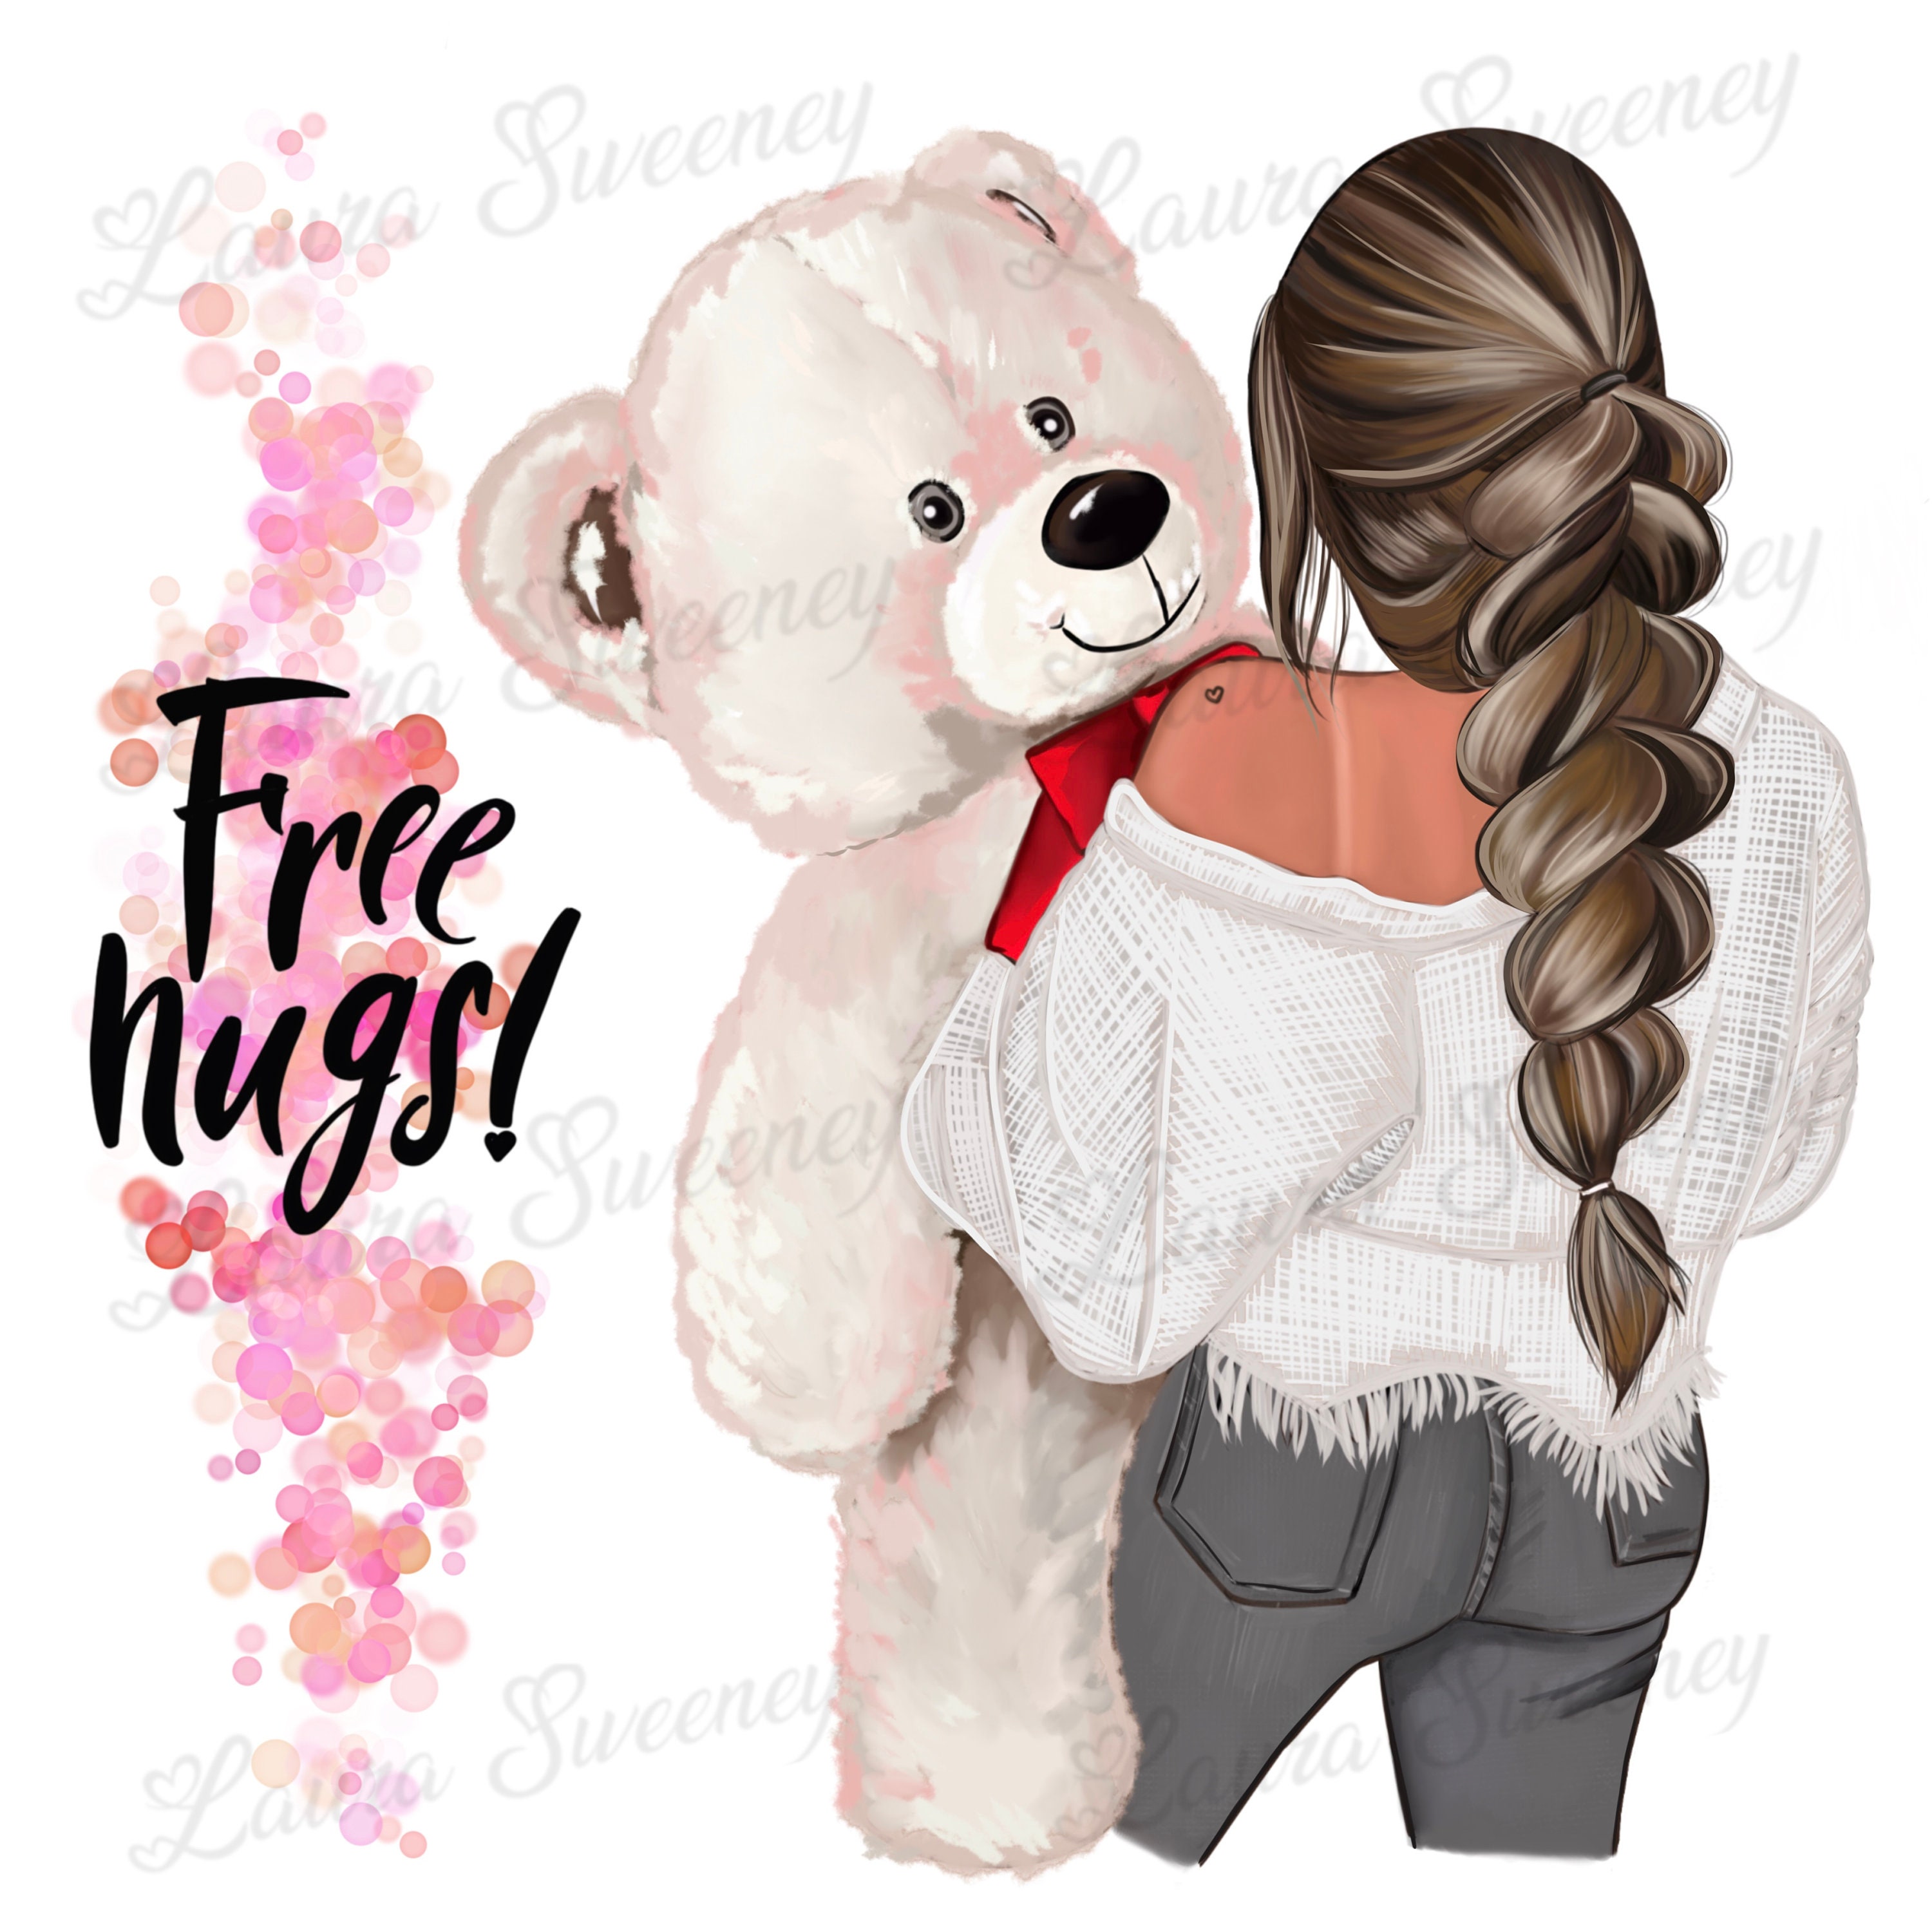 Cute Girl With Teddy Bear Clipart, Teddy Bear Clipart, Plush Teddy Clipart,  Free Hugs, PNG Instant Digital Download 